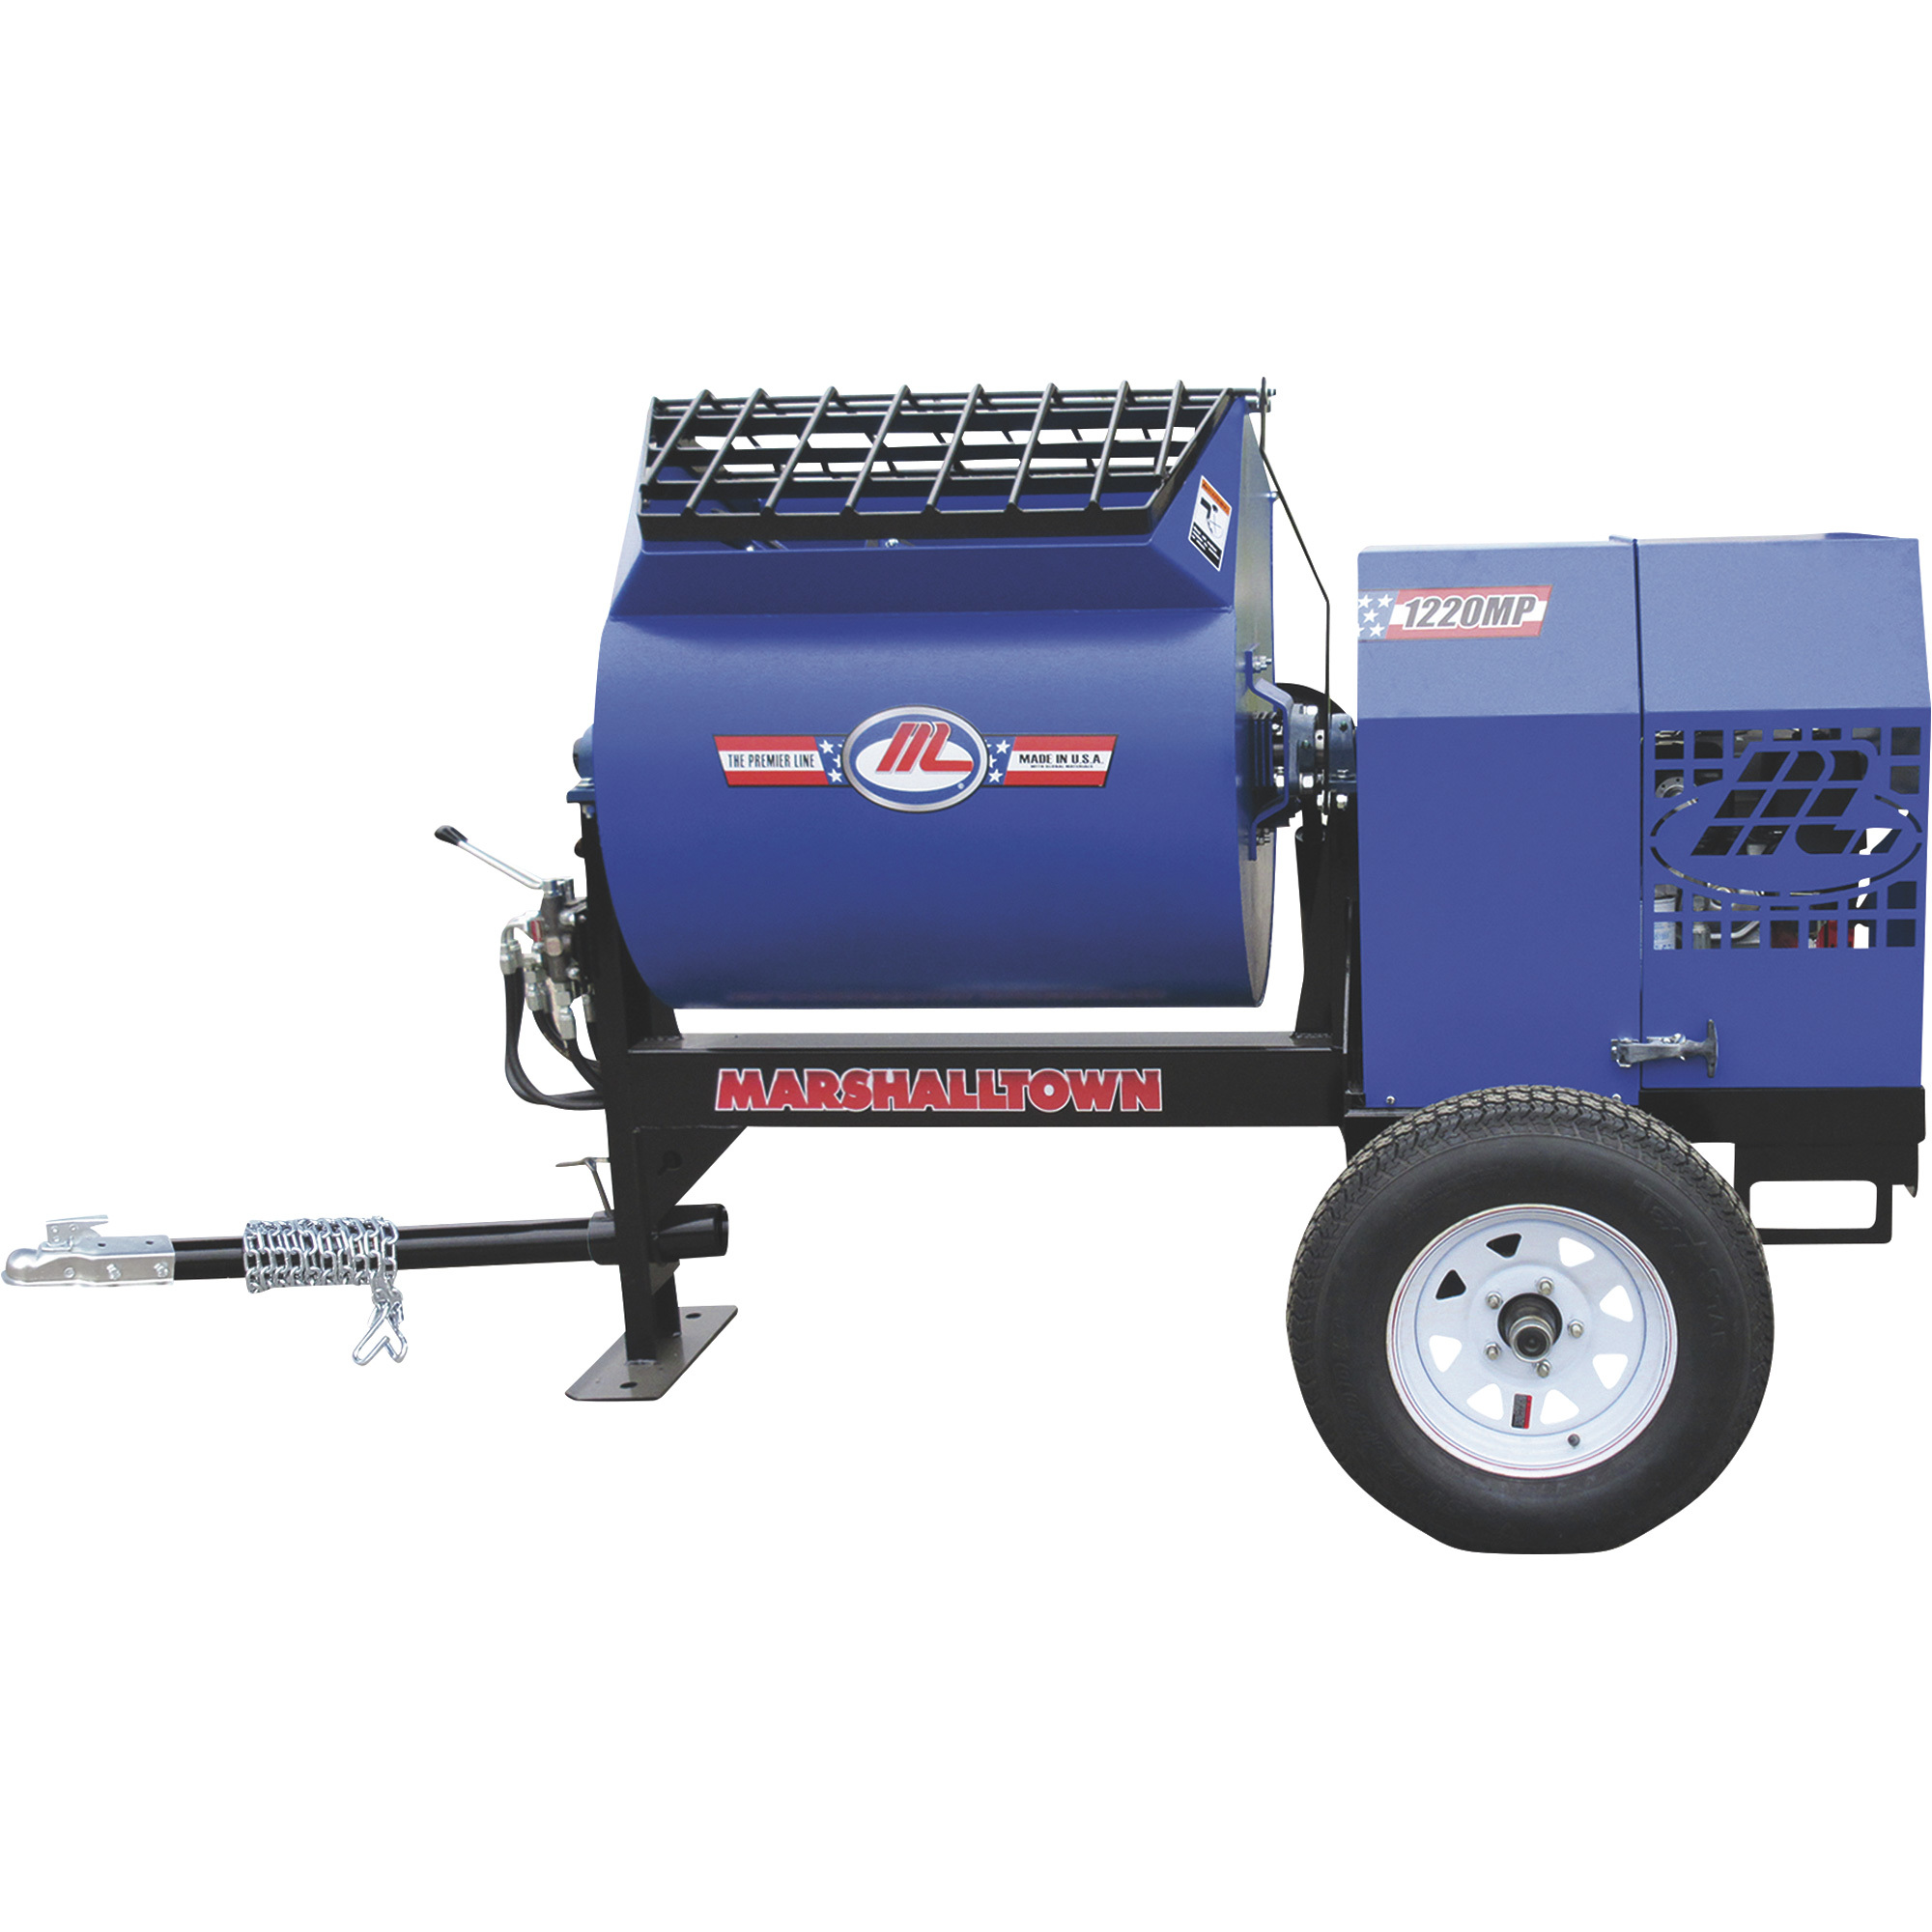 Marshalltown 1220MP Mortar/Plaster Mixer with Ball Tow and 13 HP Gas Engine â Model 1220MP13HB